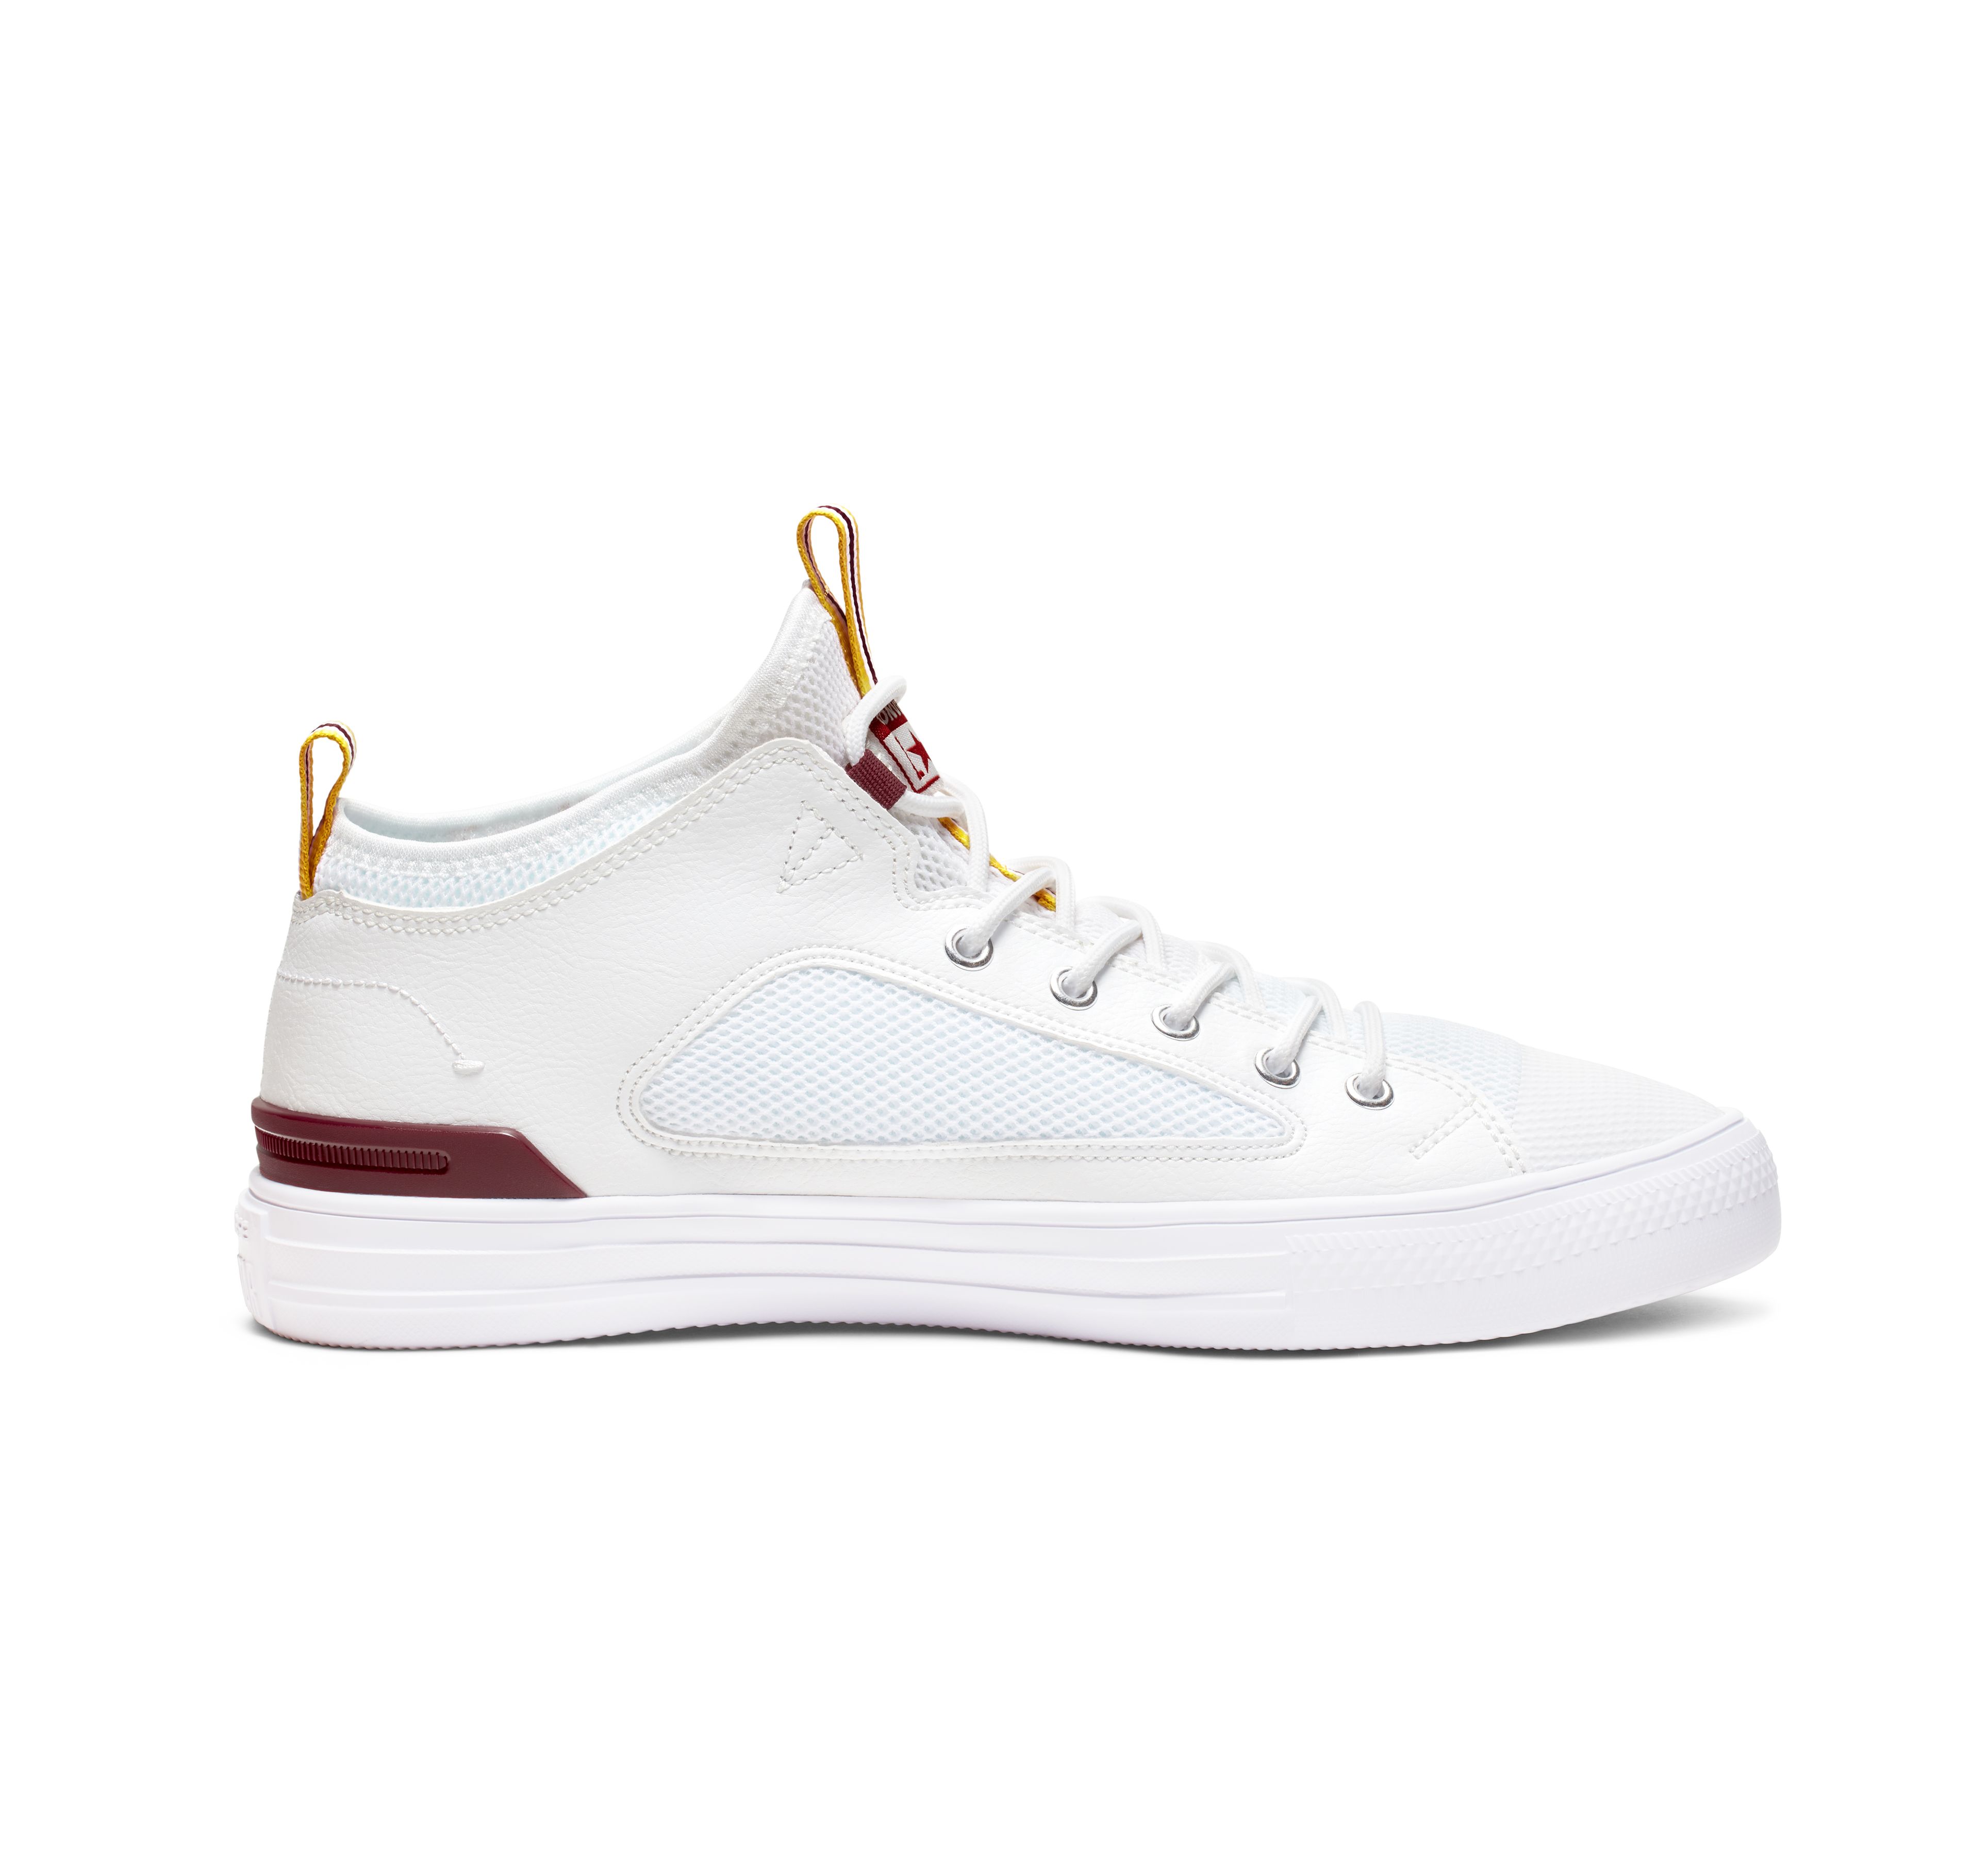 converse chuck taylor ox white leather